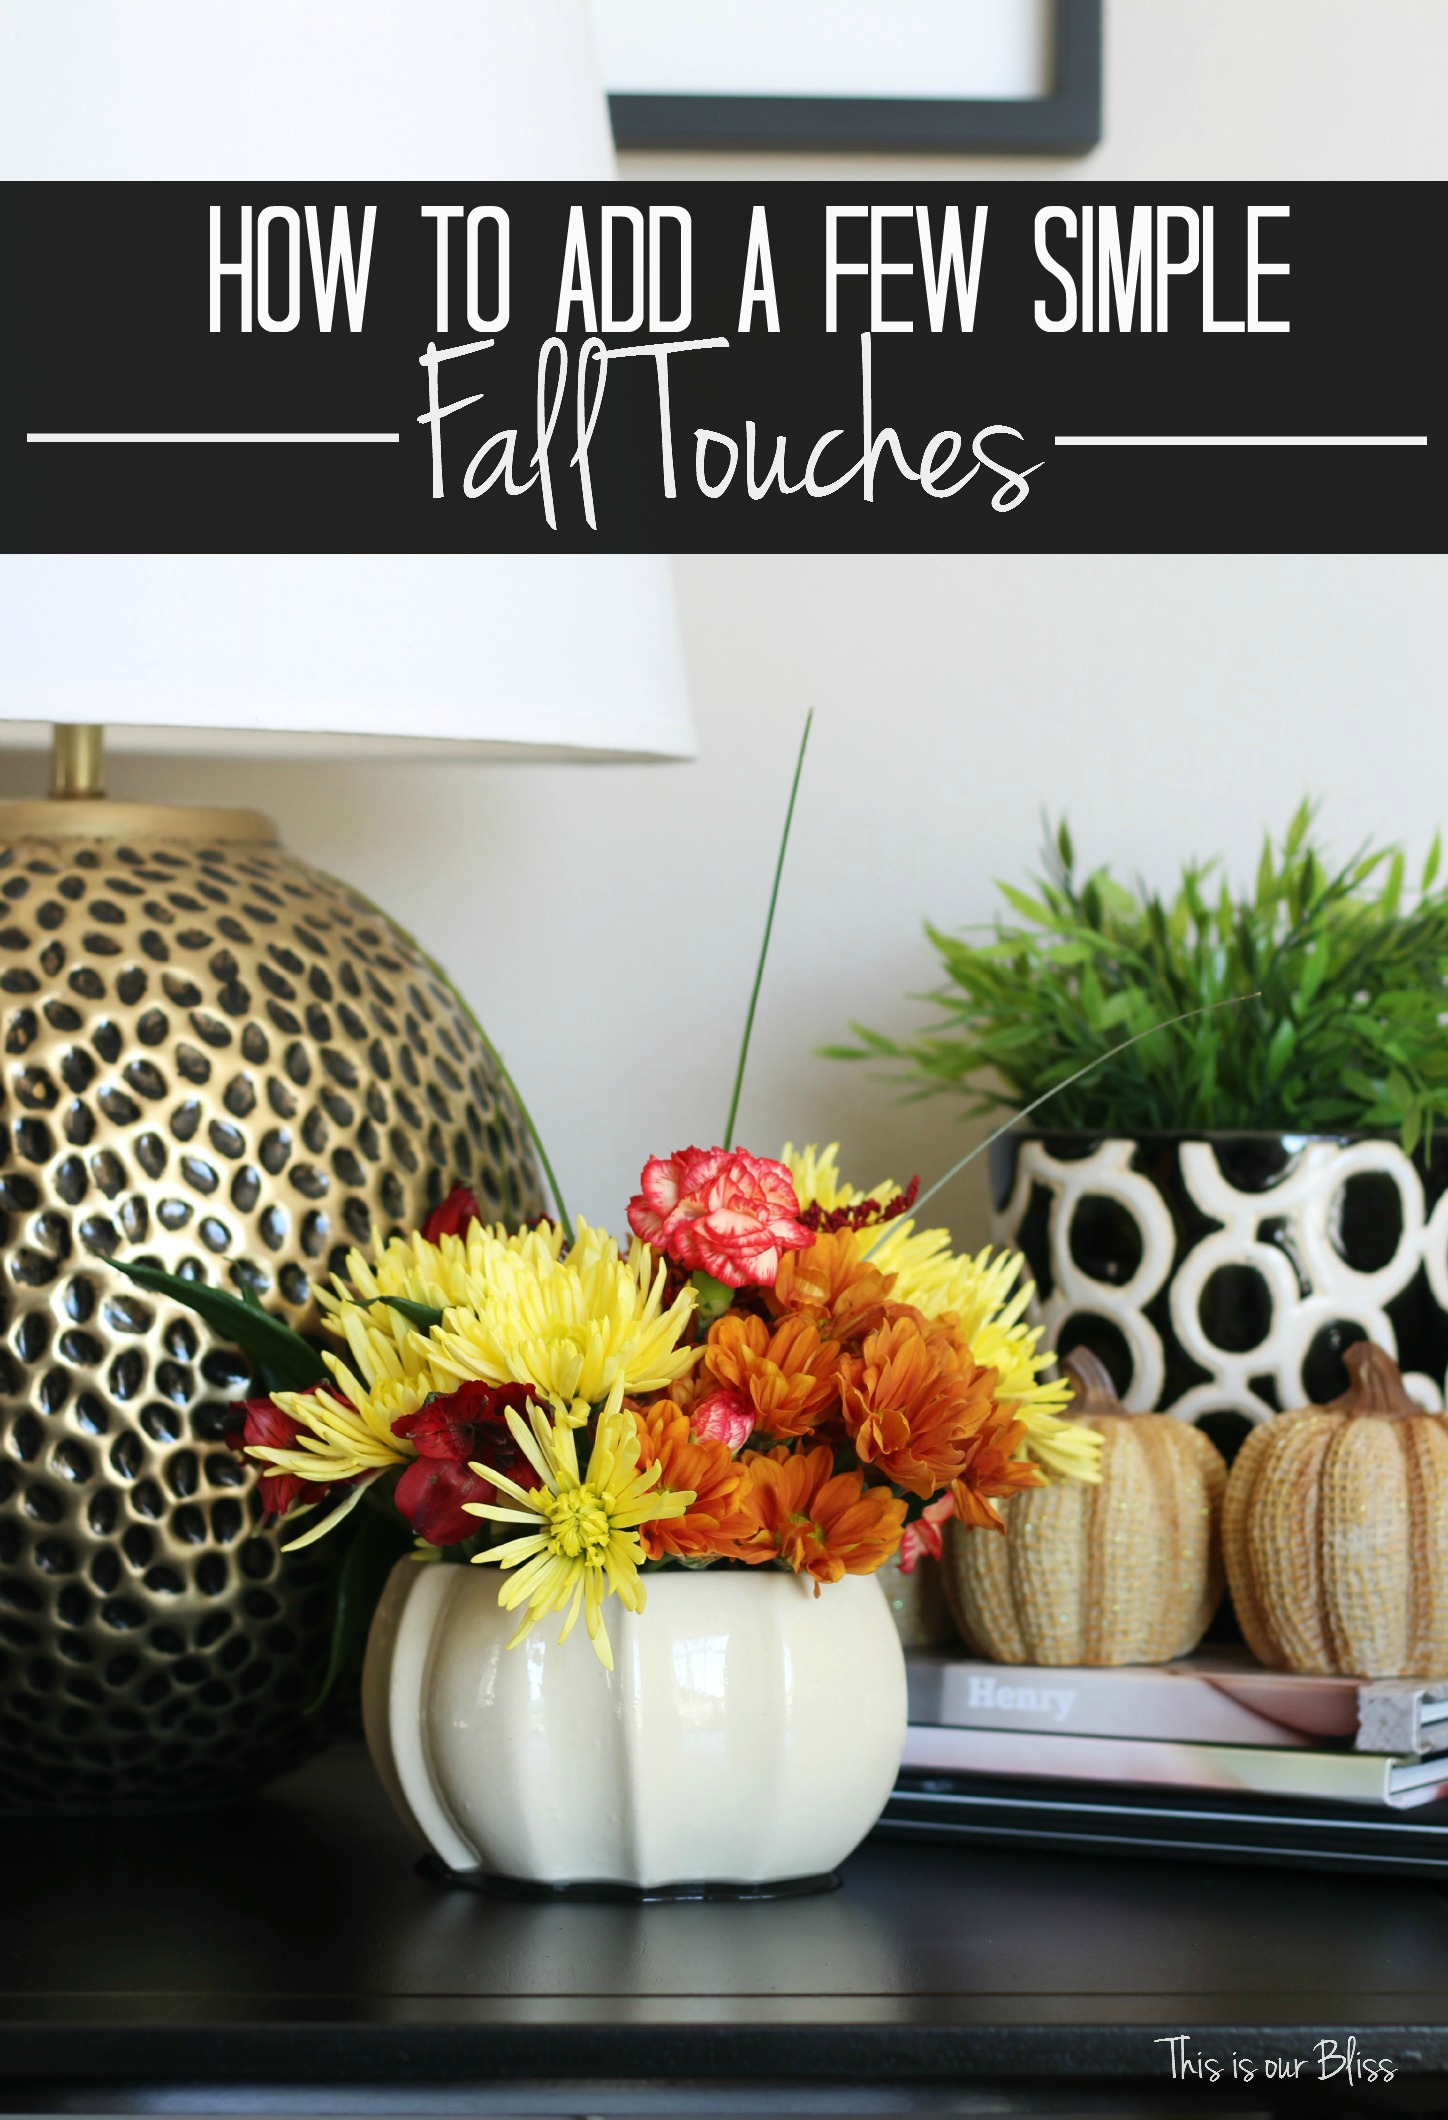 how to add a few simple fall touches - easy fall vignette - simply fall decor - fall flowers - end table styling - this is our Bliss